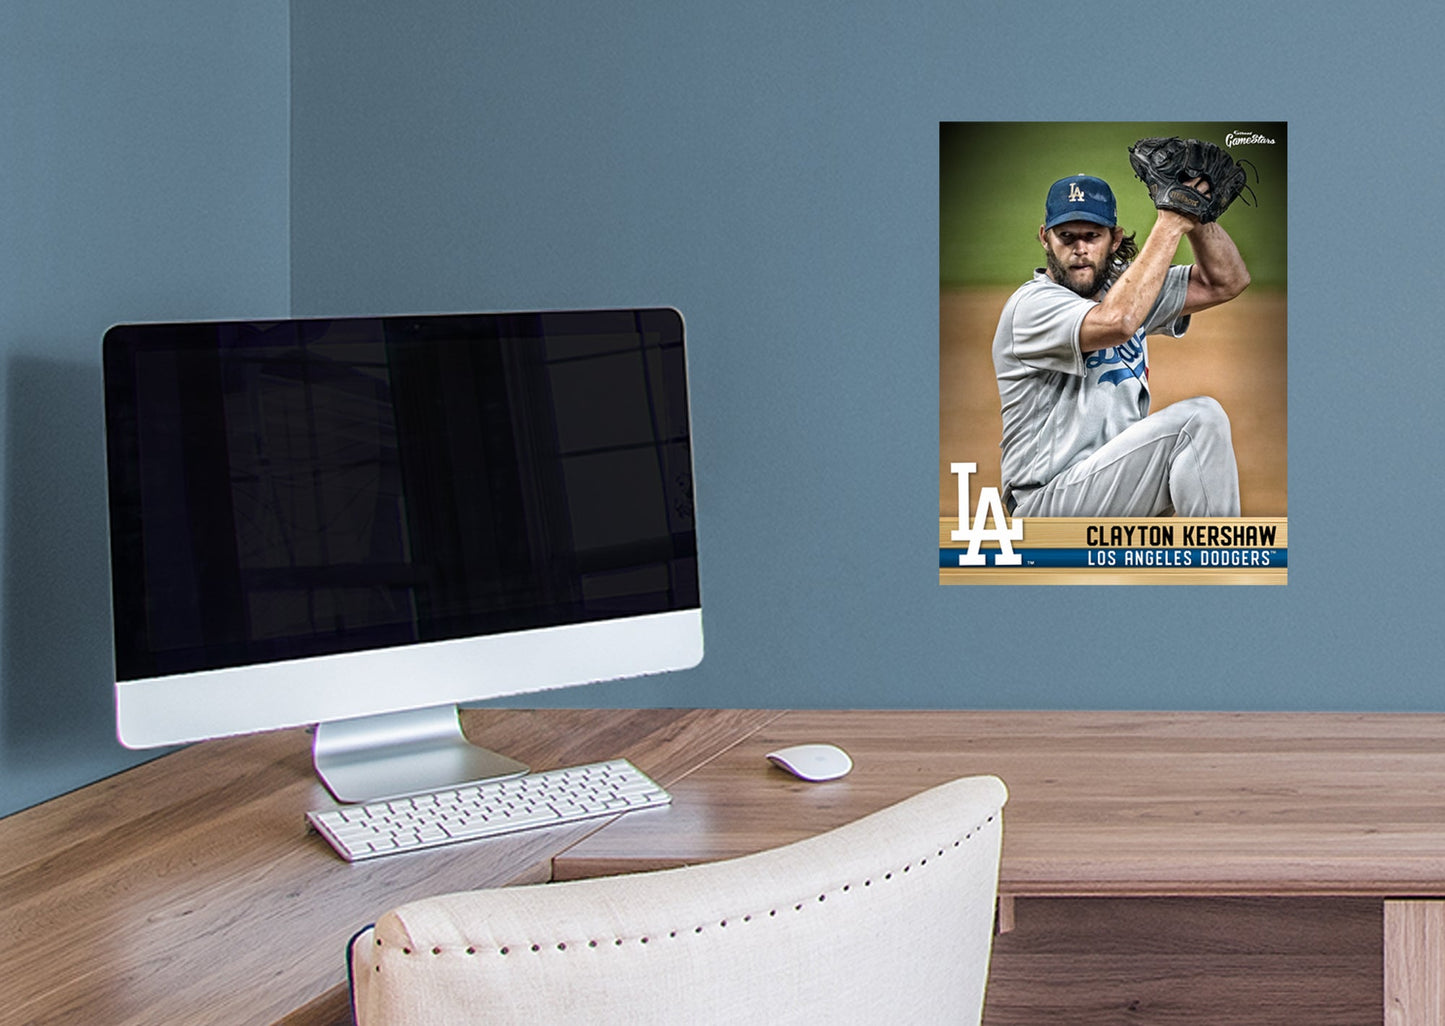 Los Angeles Dodgers: Clayton Kershaw  GameStar        - Officially Licensed MLB Removable Wall   Adhesive Decal